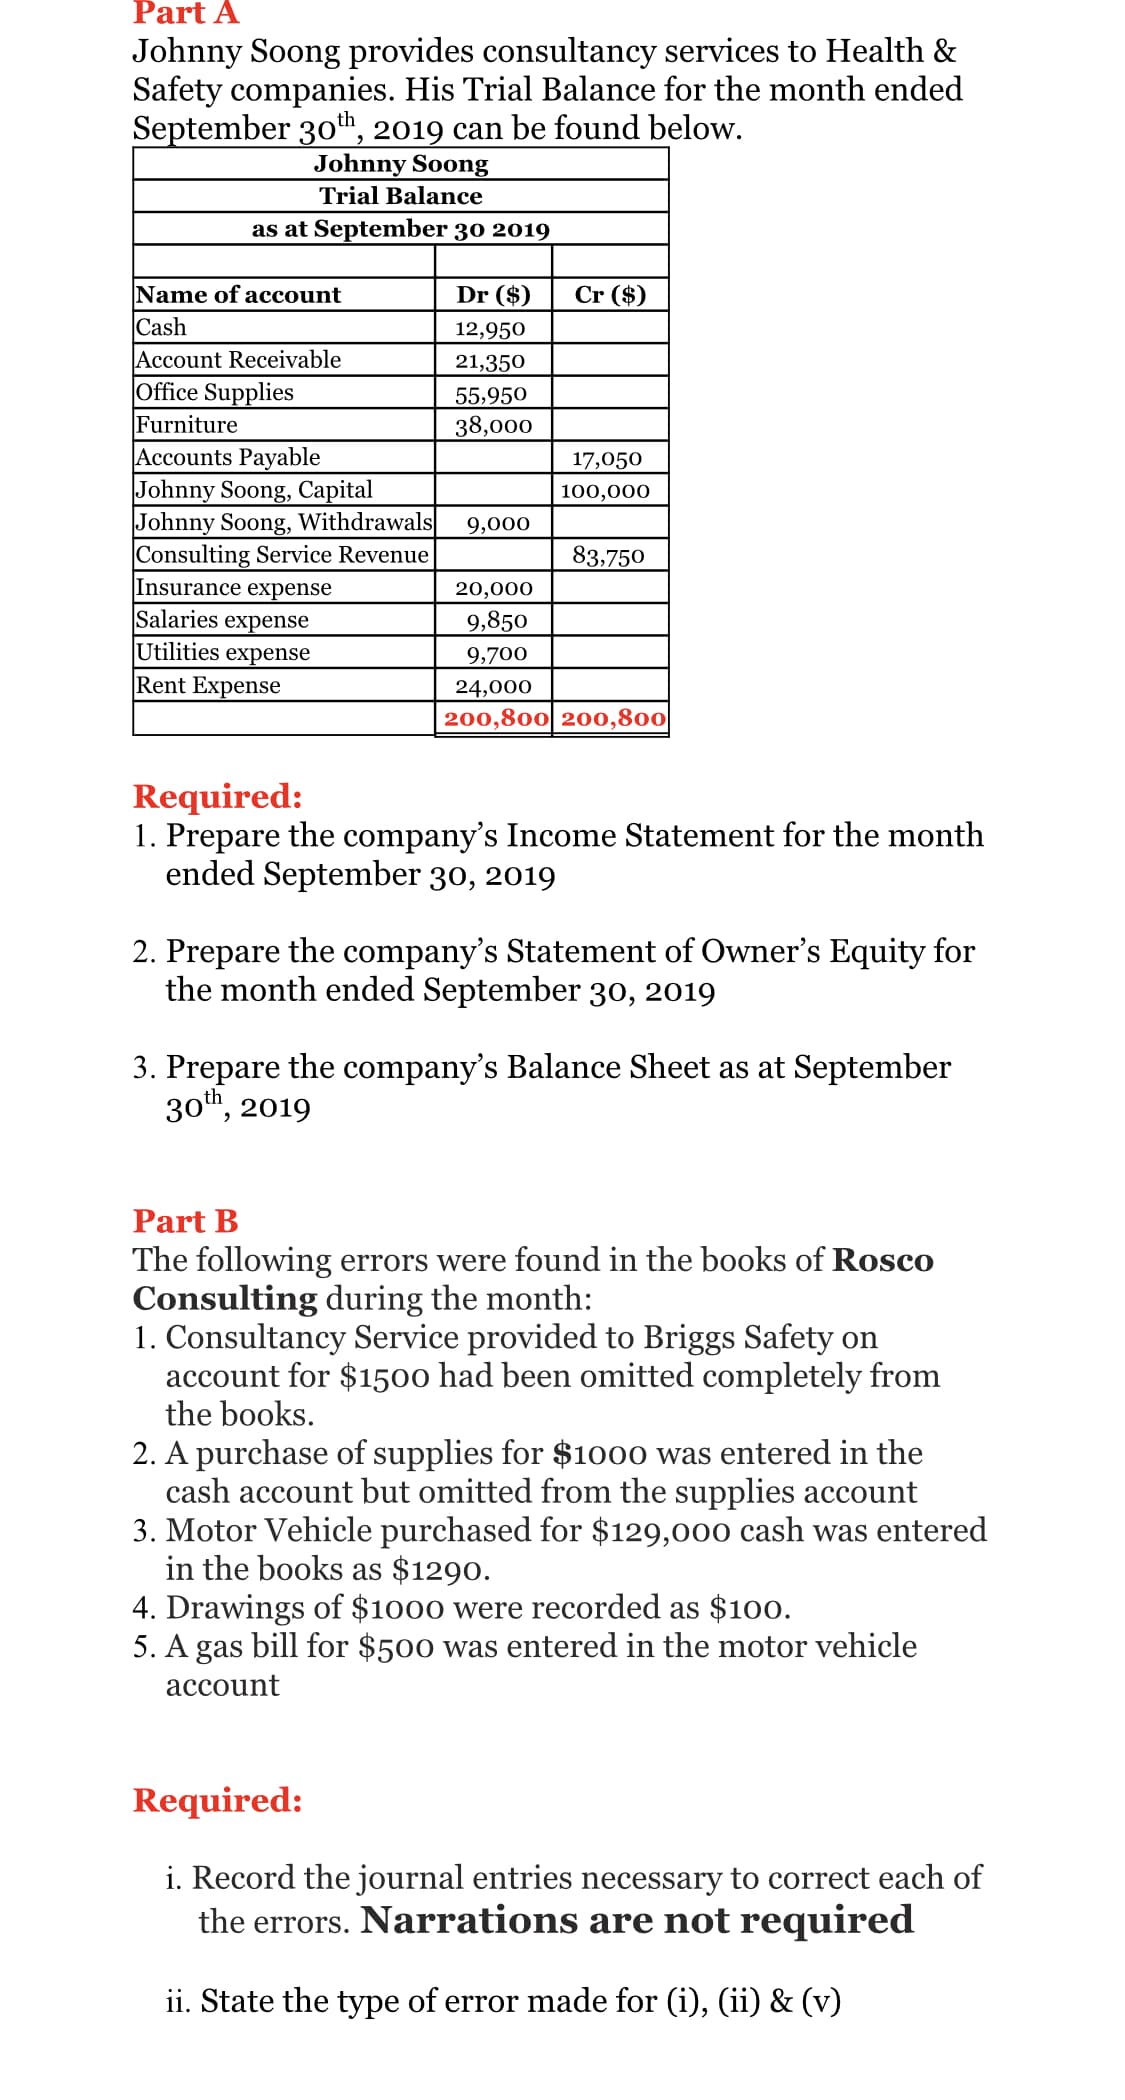 Johnny Soong provides consultancy services to Health &
Safety companies. His Trial Balance for the month ended
September 30", 2019 can be found below.
Johnny Soong
Trial Balance
as at September 30 2019
Cr ($)
Name of account
Cash
Account Receivable
Office Supplies
Furniture
Accounts Payable
Johnny Soong, Capital
Johnny Soong, Withdrawals
Consulting Service Revenue
Insurance expense
Salaries expense
Utilities expense
Rent Expense
Dr ($)
12,950
21,350
55,950
38,000
17,050
100,000
9,000
83,750
20,000
9,850
9,700
24,000
200,800| 200,800|
Required:
1. Prepare the company's Income Statement for the month
ended September 30, 2019
2. Prepare the company's Statement of Owner's Equity for
the month ended September 30, 2019
3. Prepare the company's Balance Sheet as at September
30th, 2019
